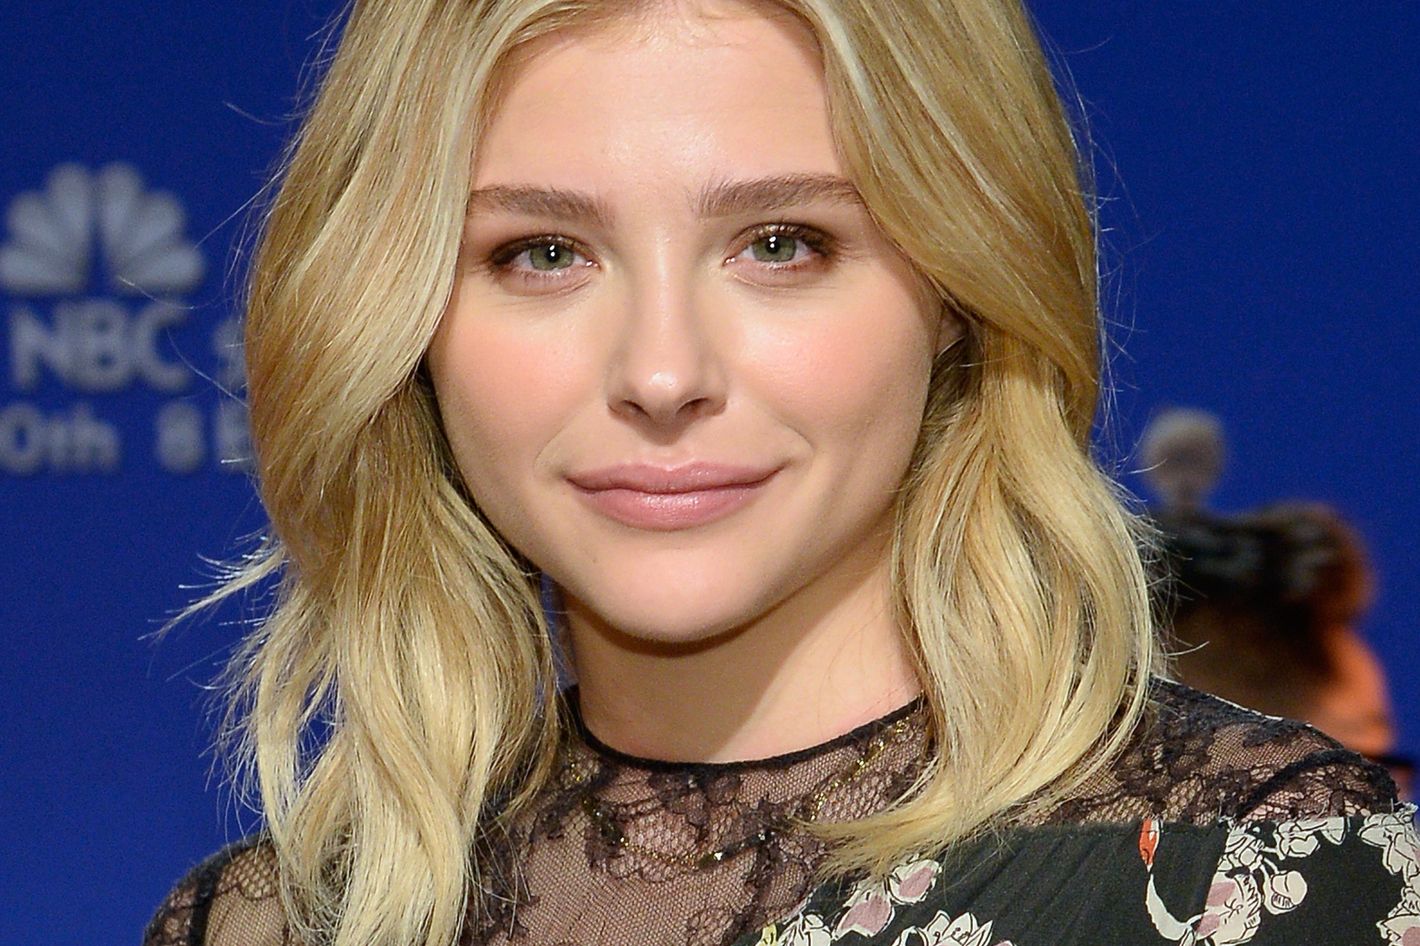 Chloe Grace Moretz Was Once Told She Was 'Too Pretty' to Star in